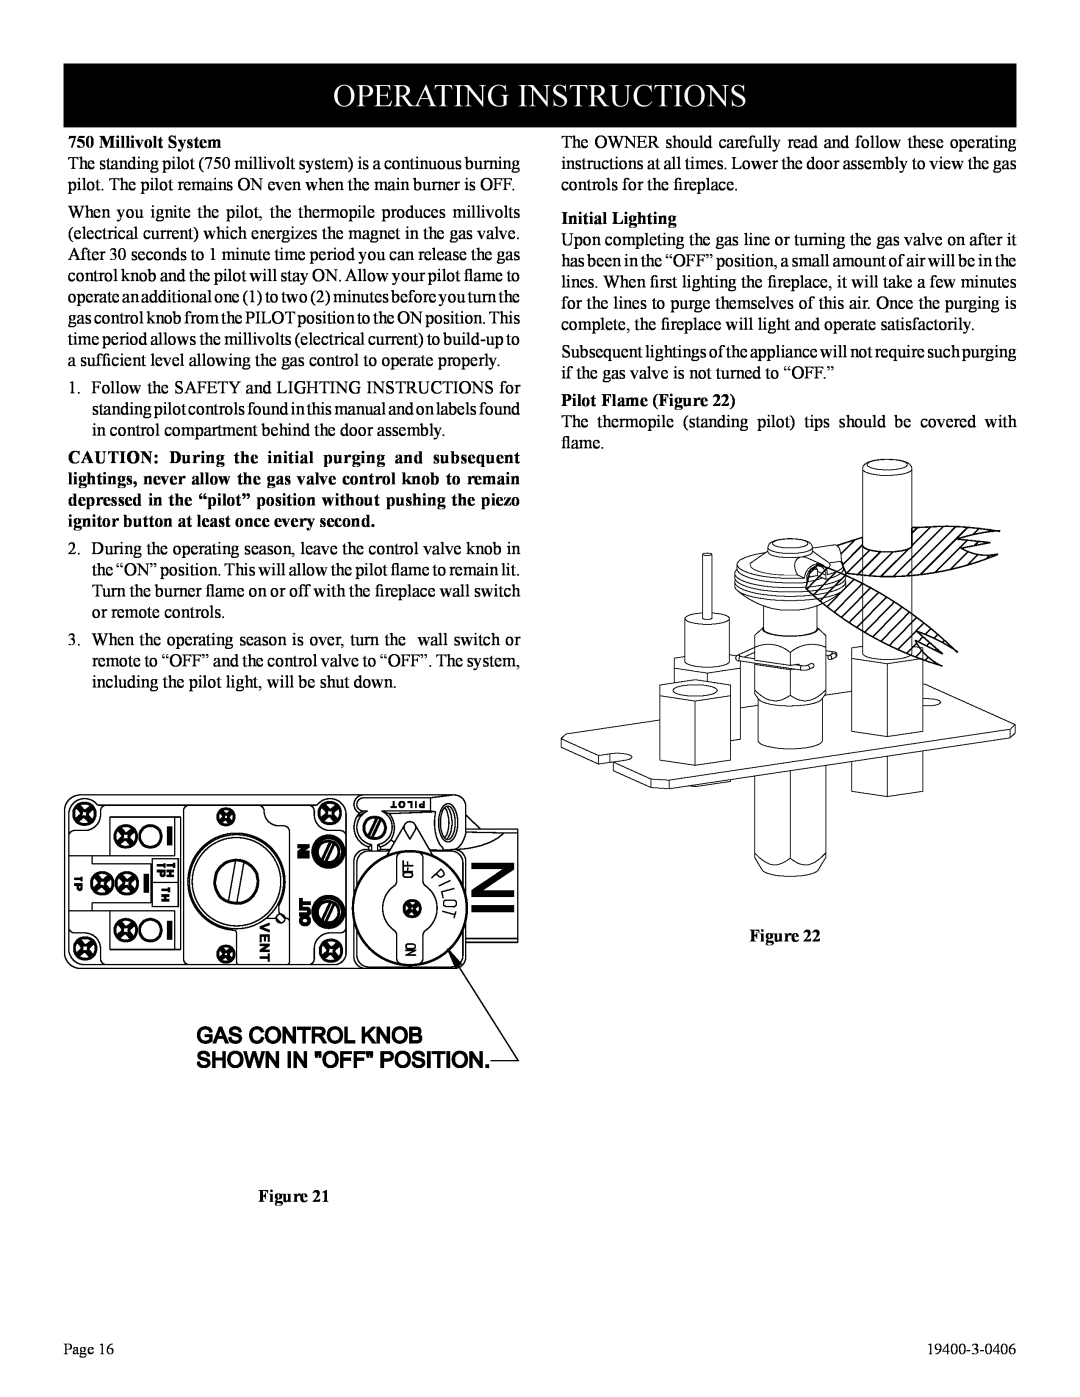 Vulcan-Hart BVD36FP32(F,L)N-1 Operating Instructions, Gas Control Knob Shown In Off Position, Millivolt System 